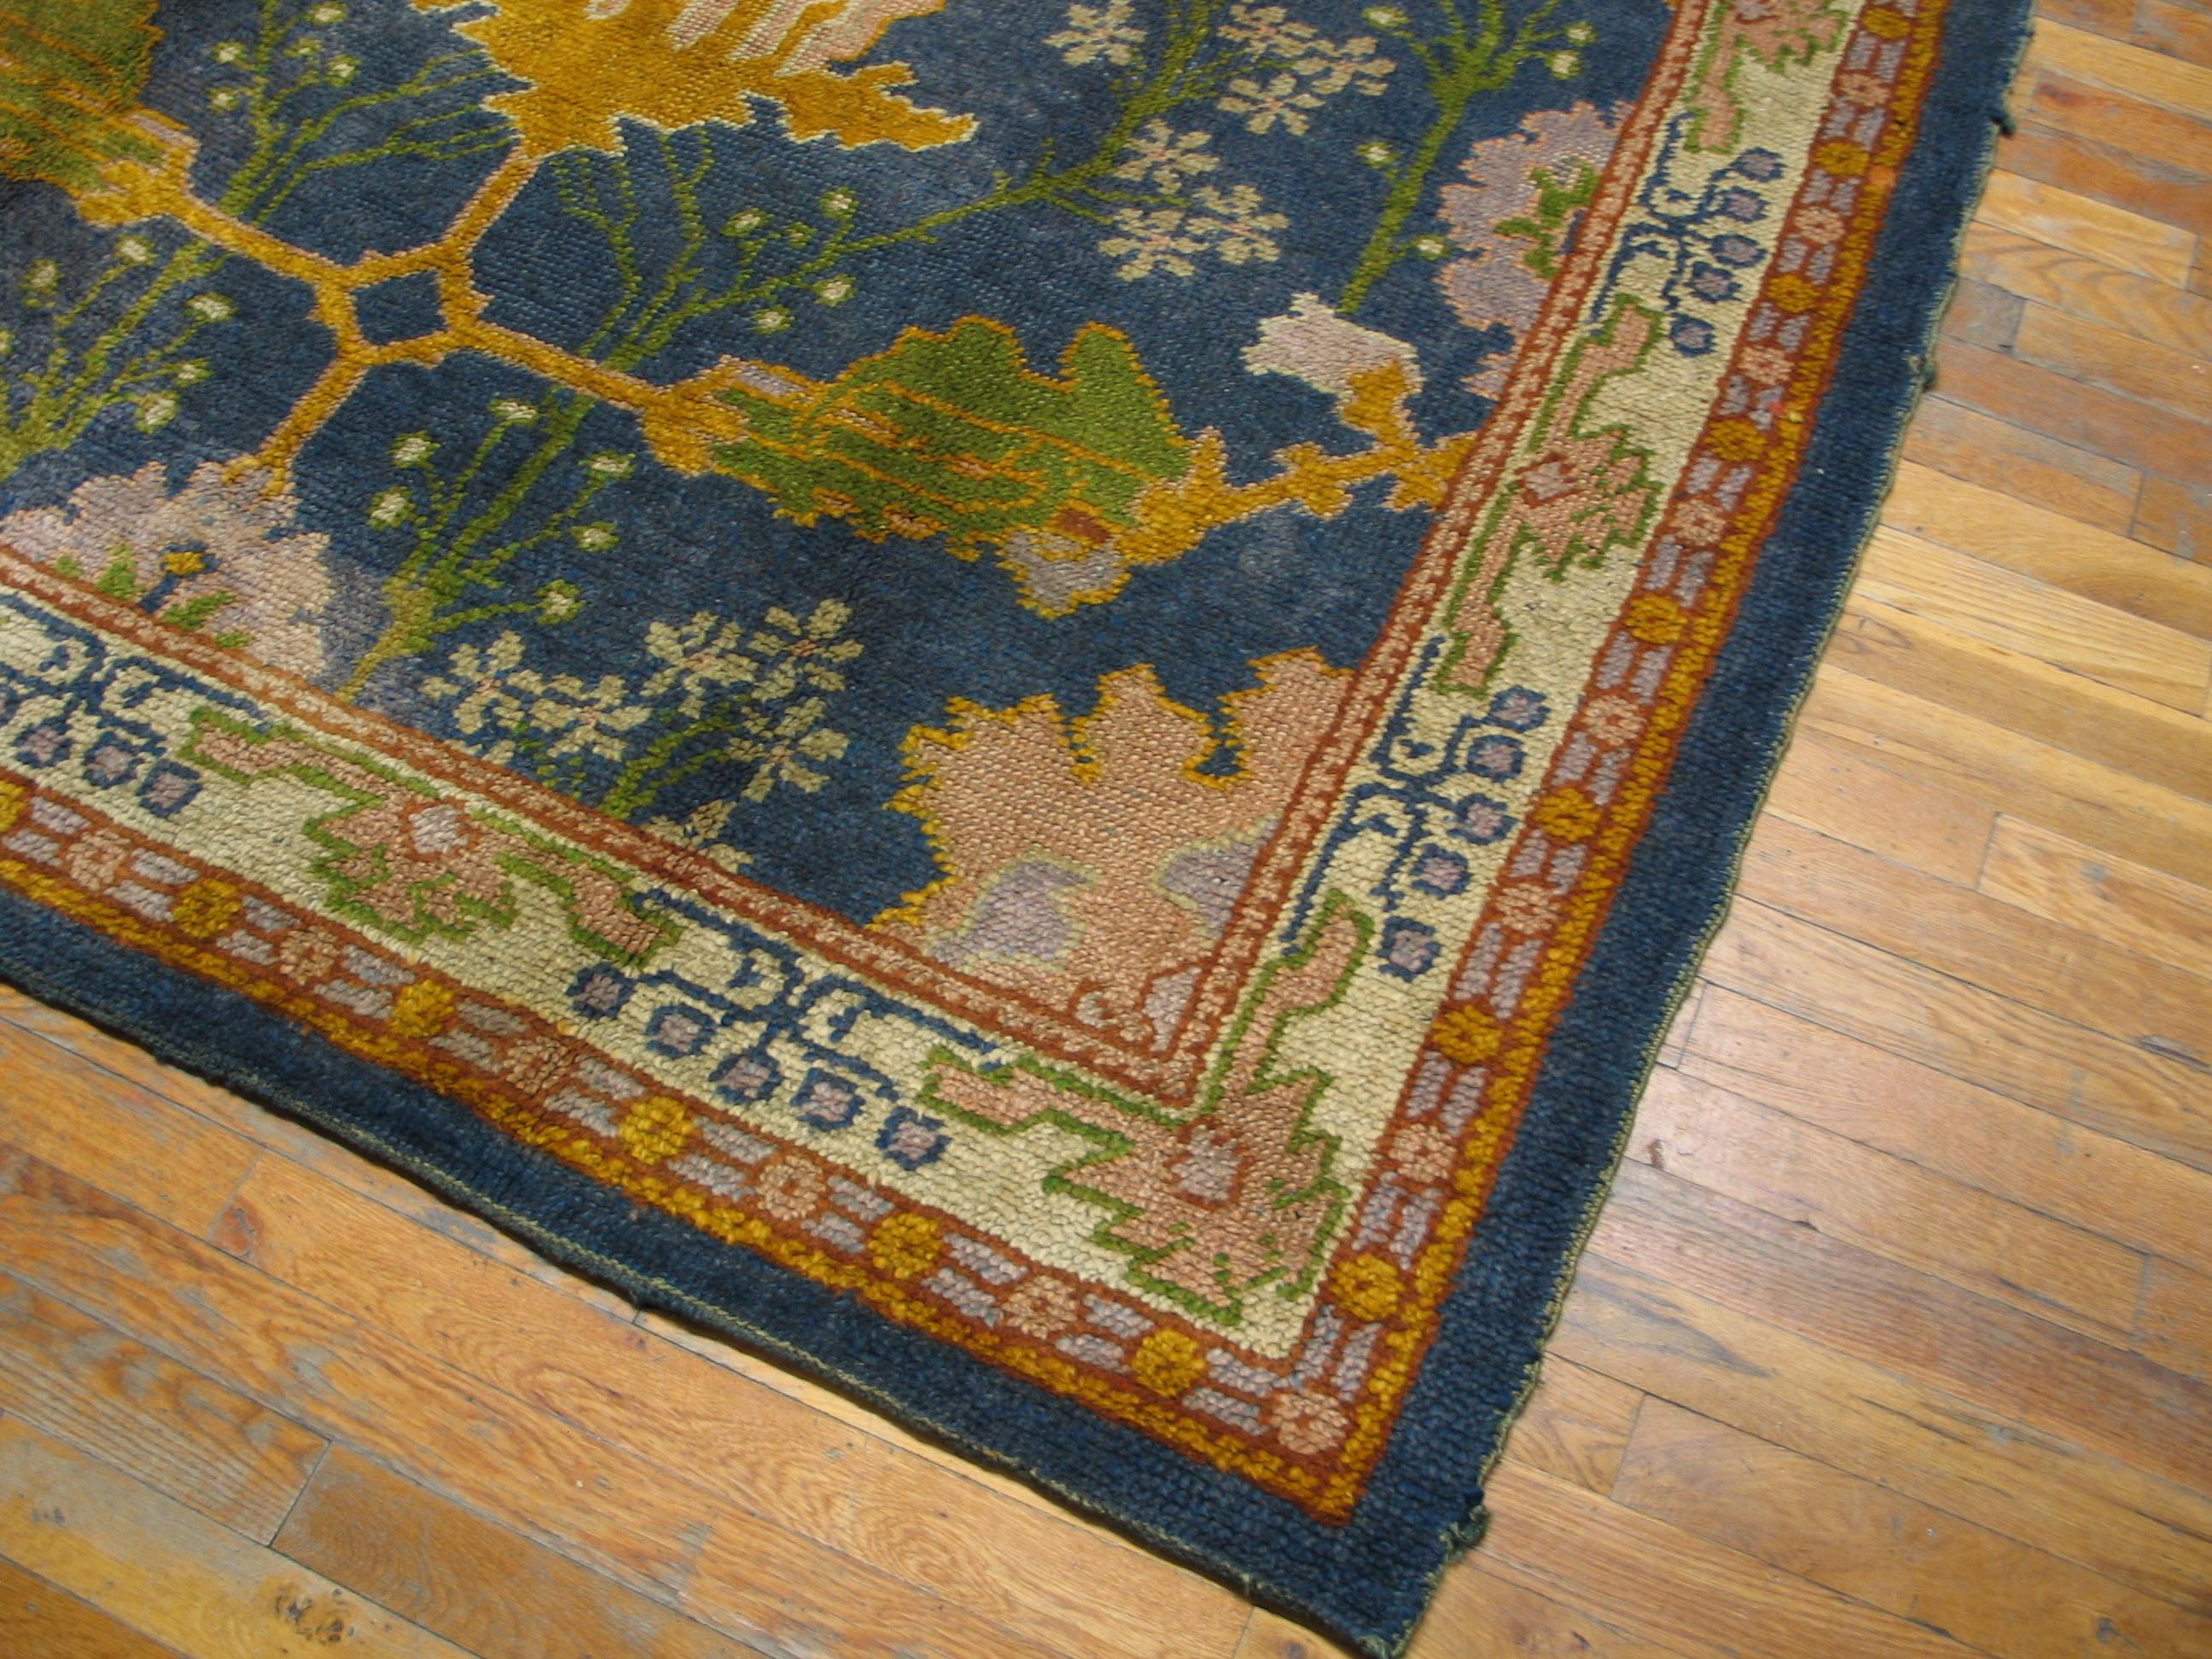 Early 20th Century Donegal Arts & Crafts Carpet Designed by Gavin Morton
6' x 9' - 183 x 275 cm